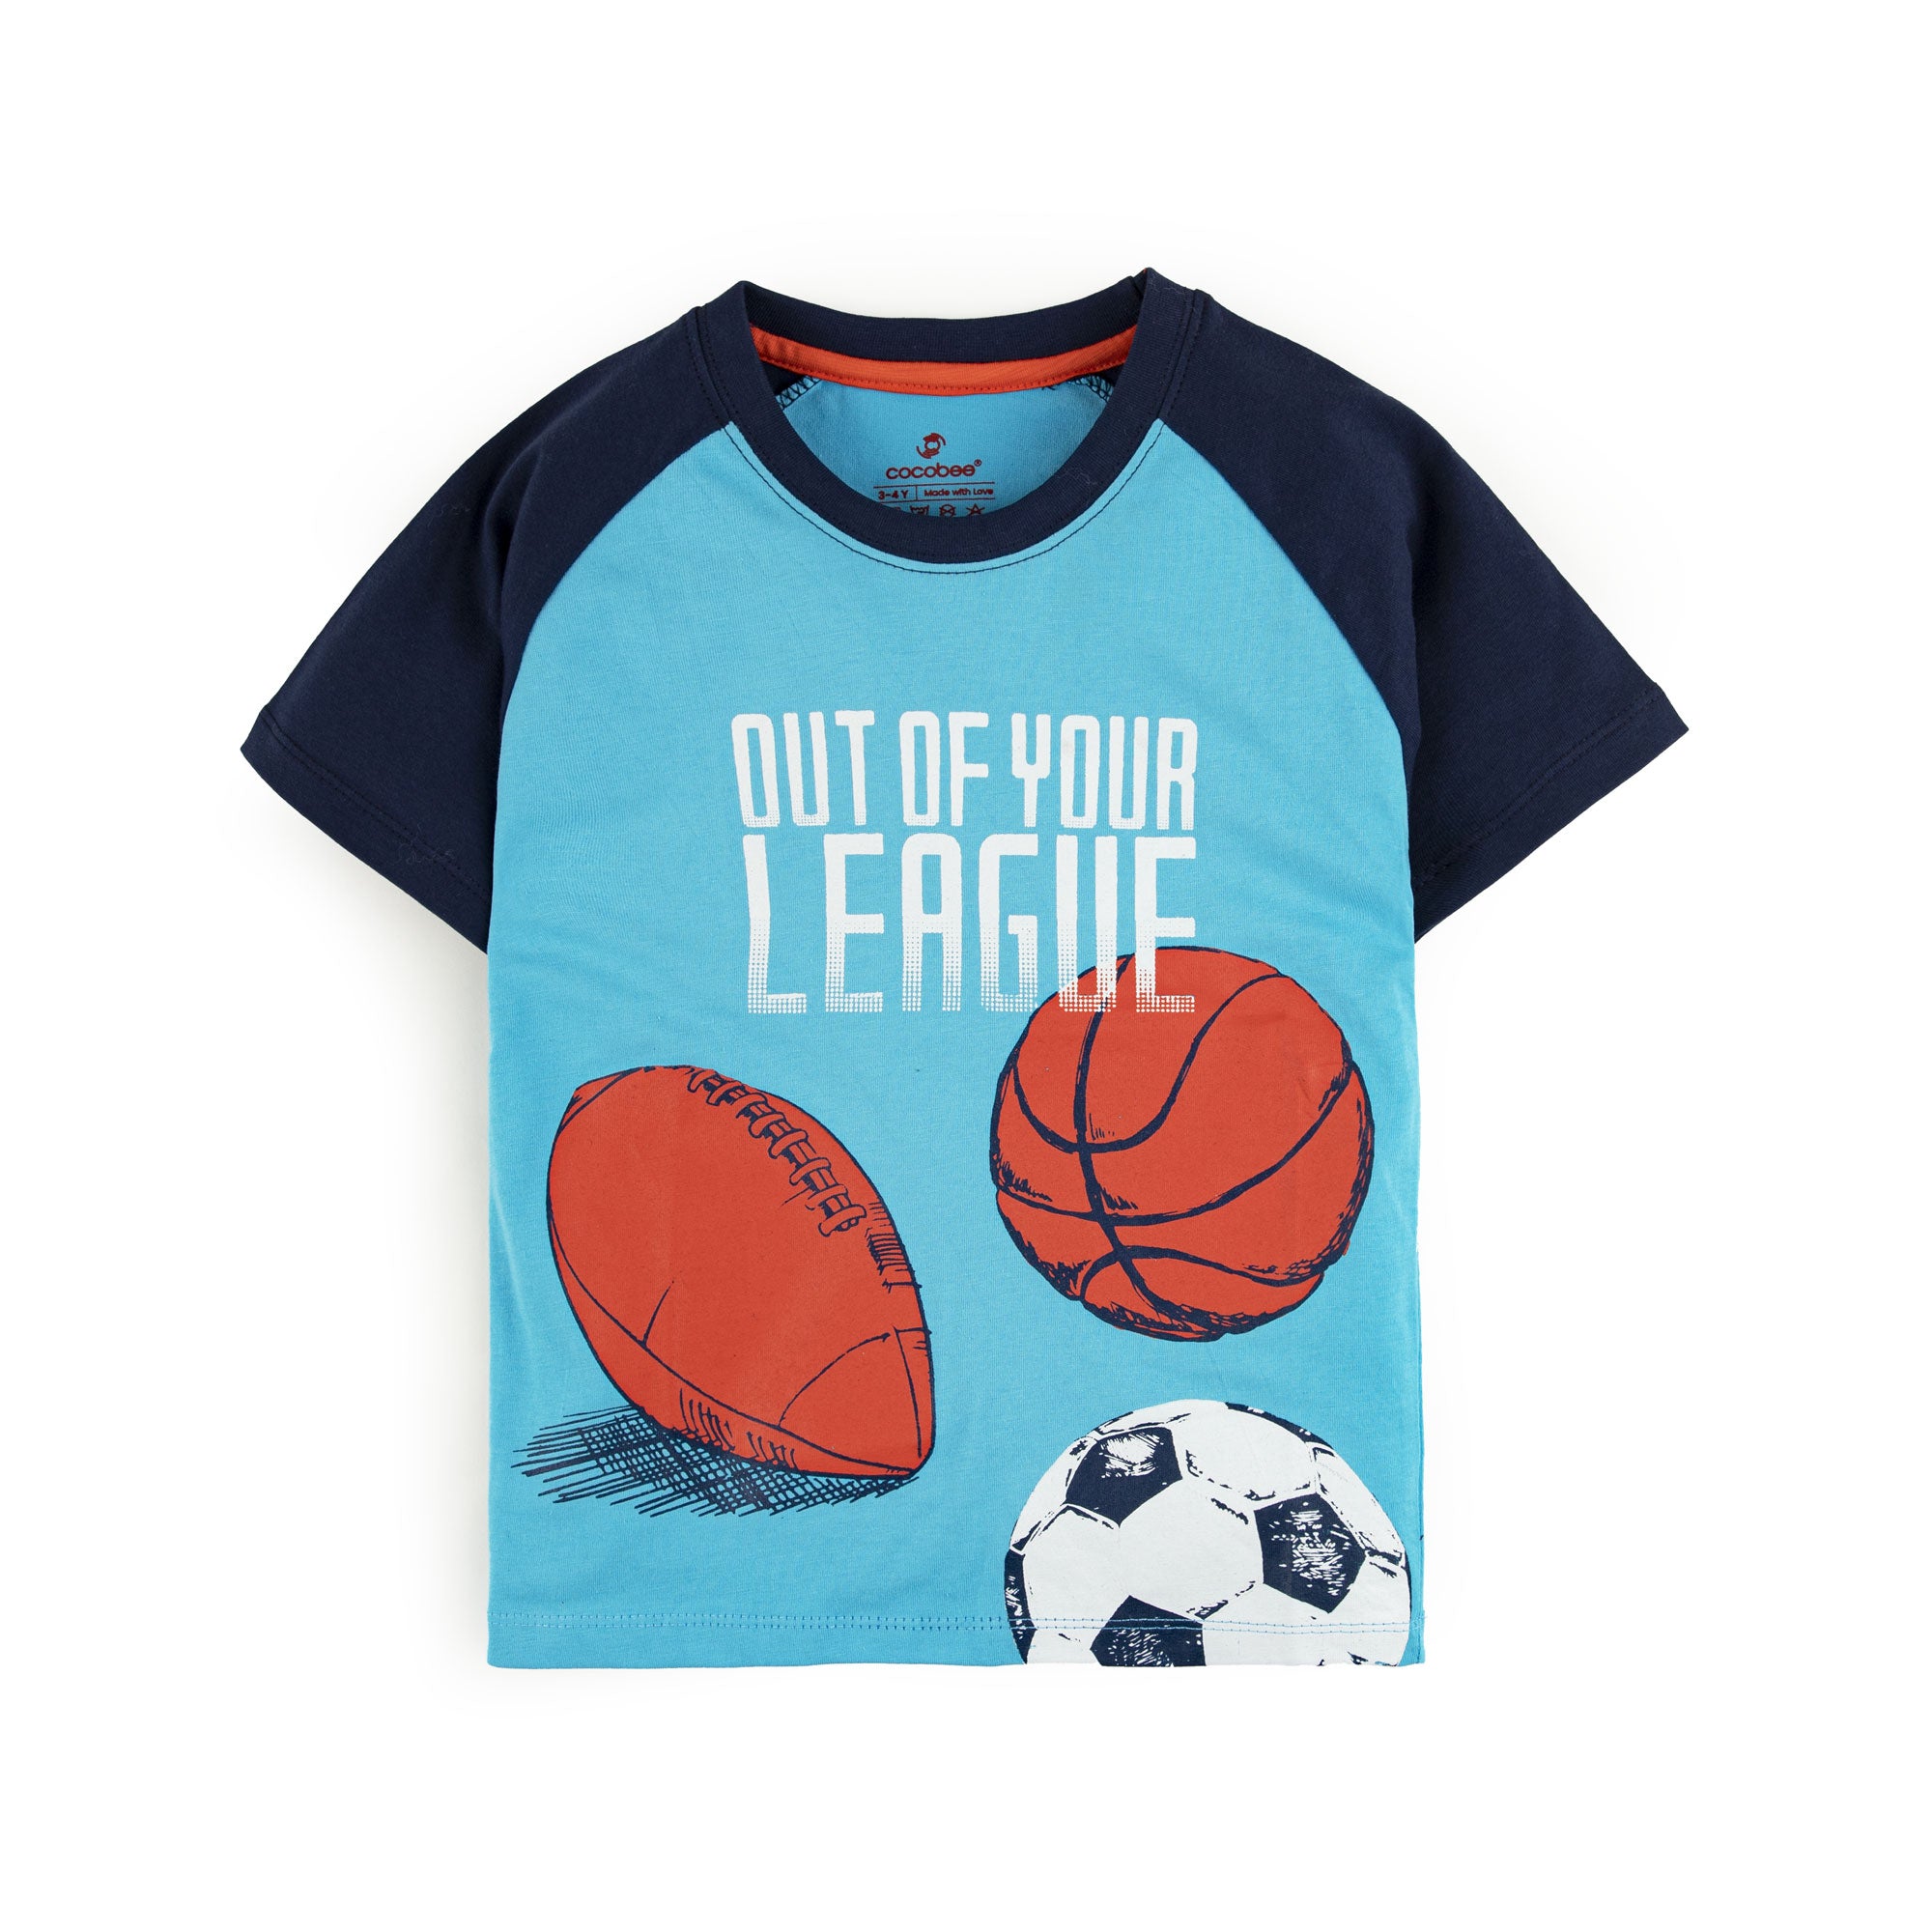 All about sports T-shirt